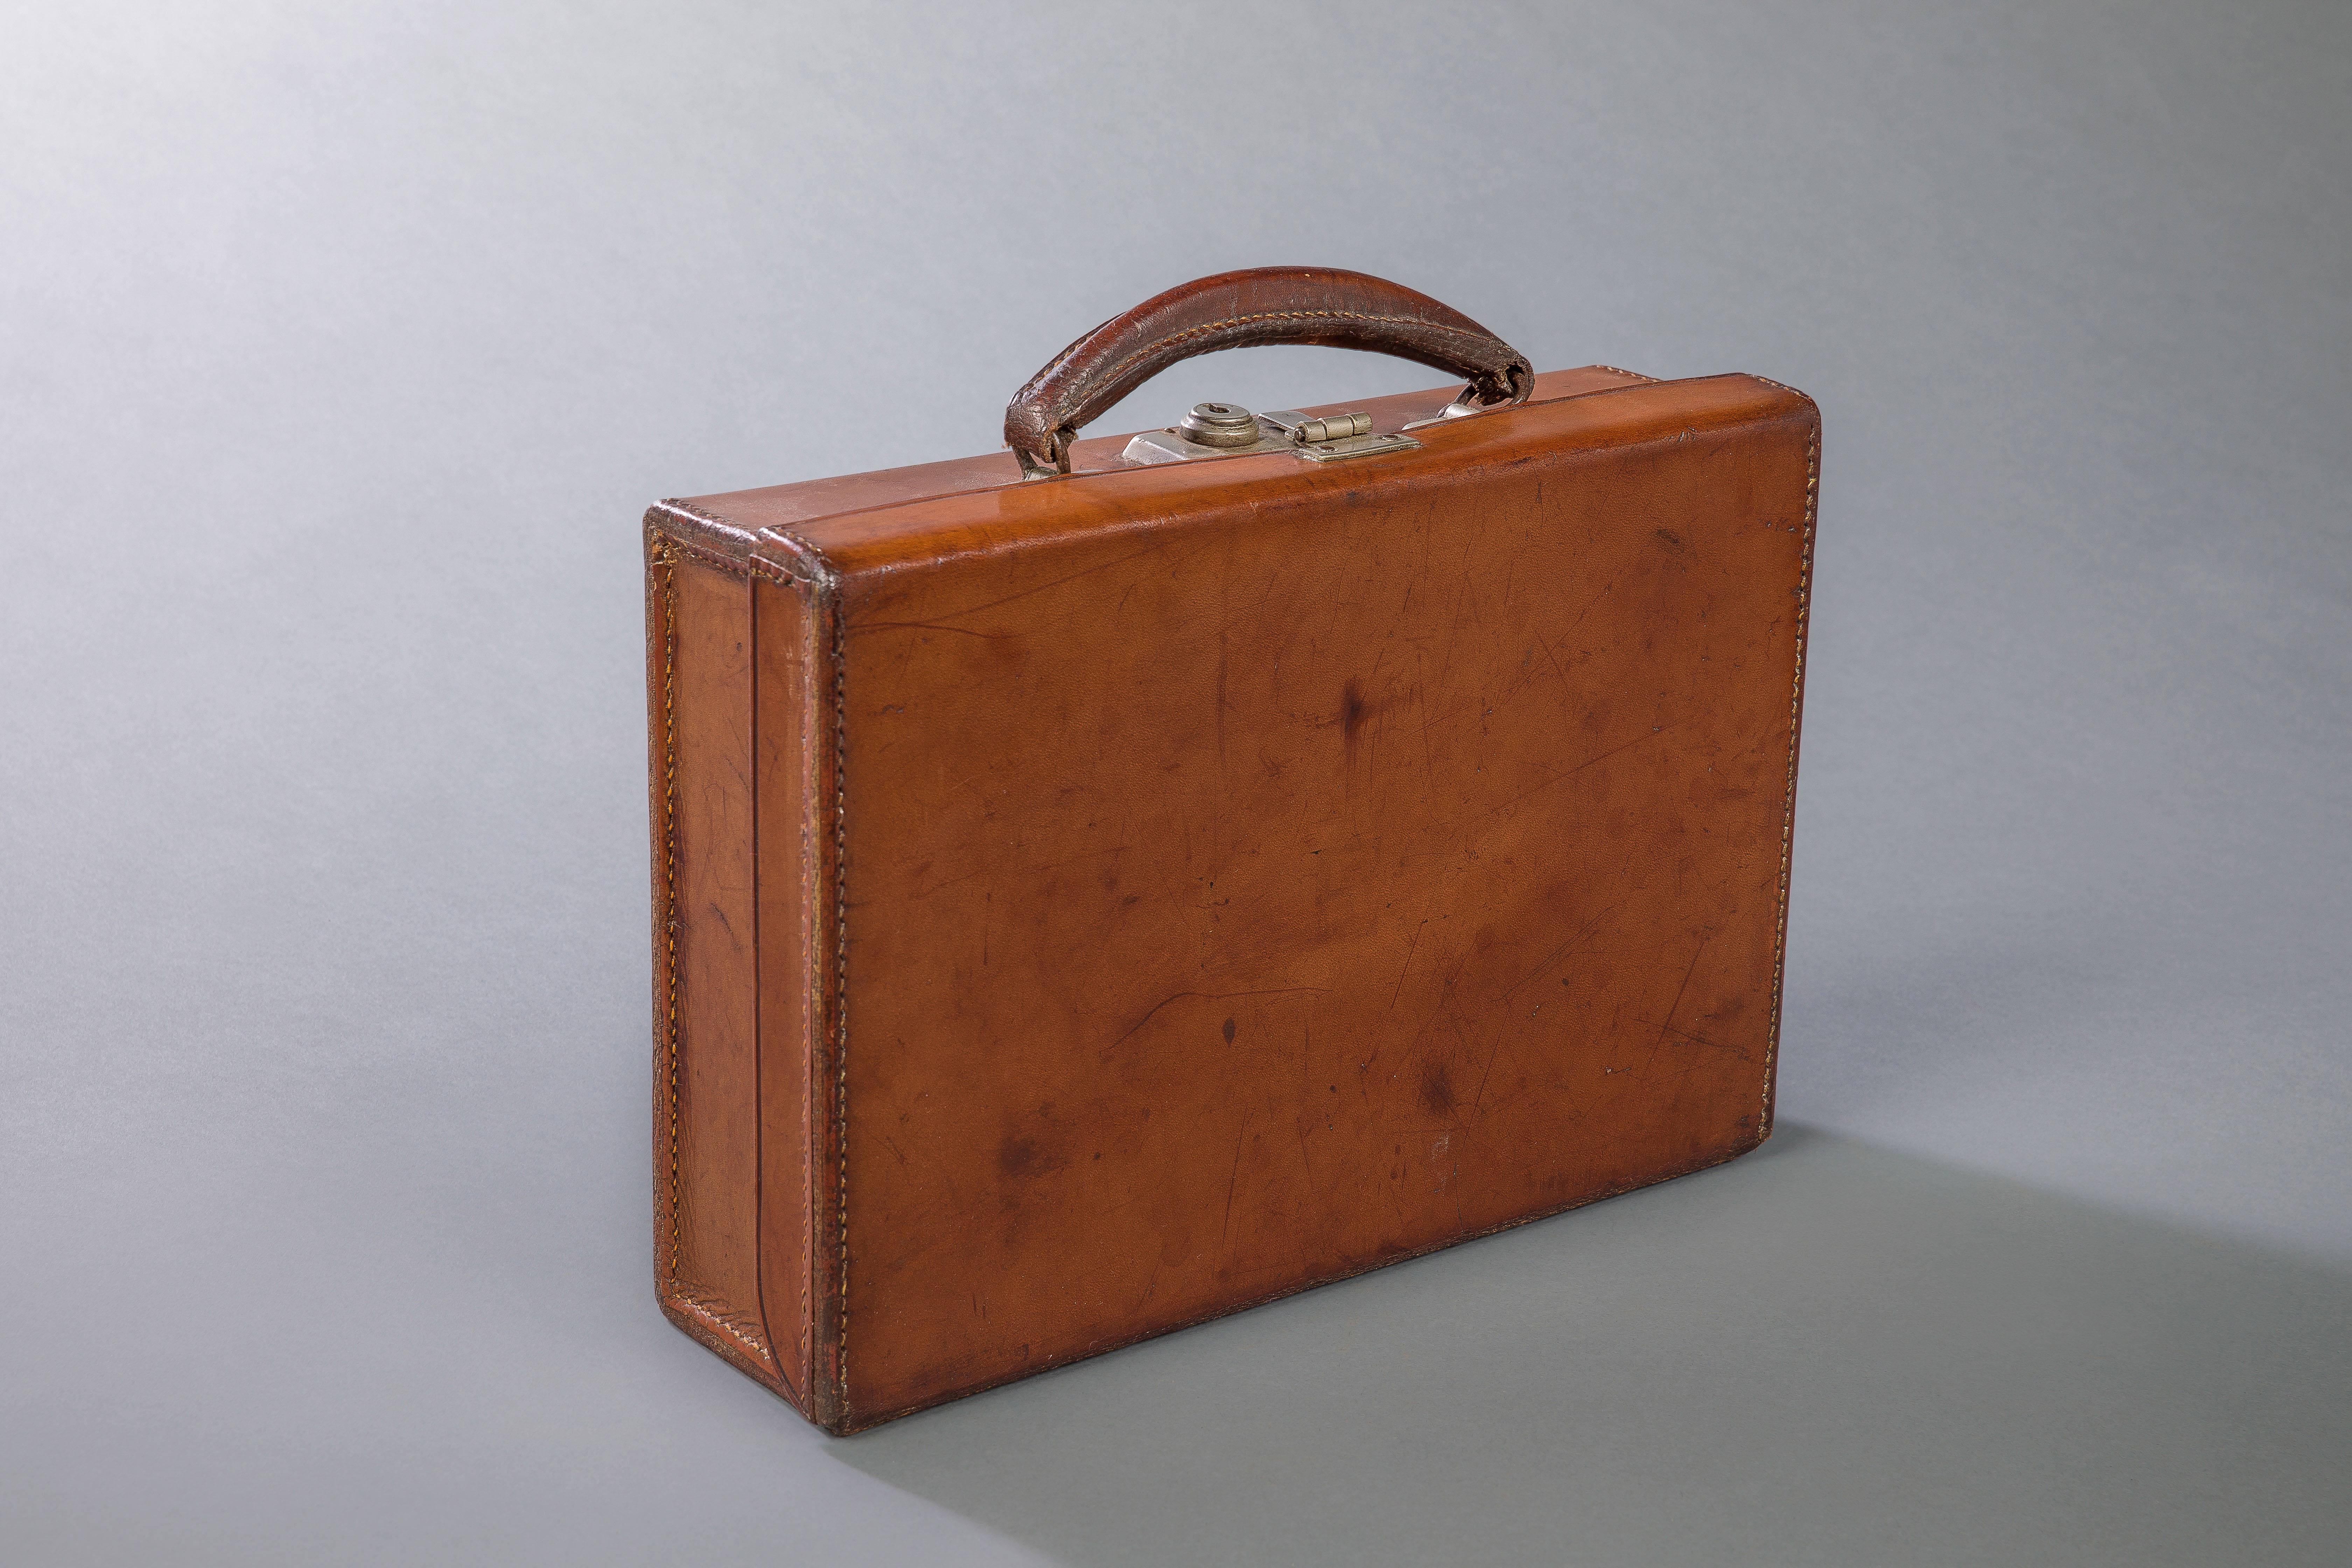 A good case of English hide leather from the late 19th-early 20th century.